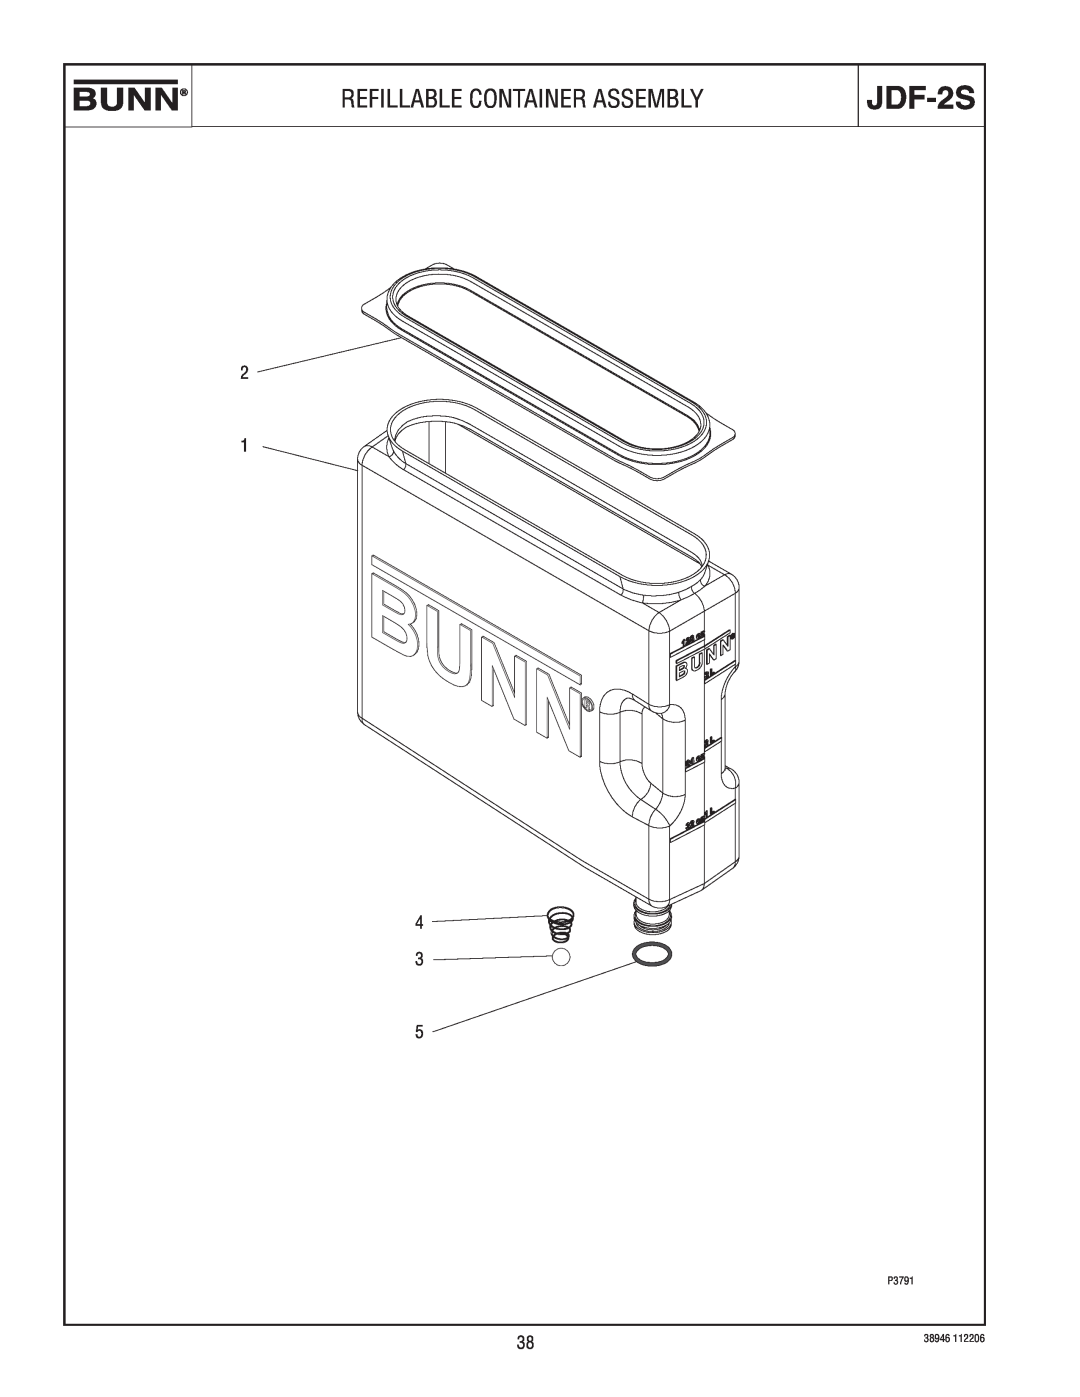 Bunn JDF-2S manual Refillable Container Assembly 